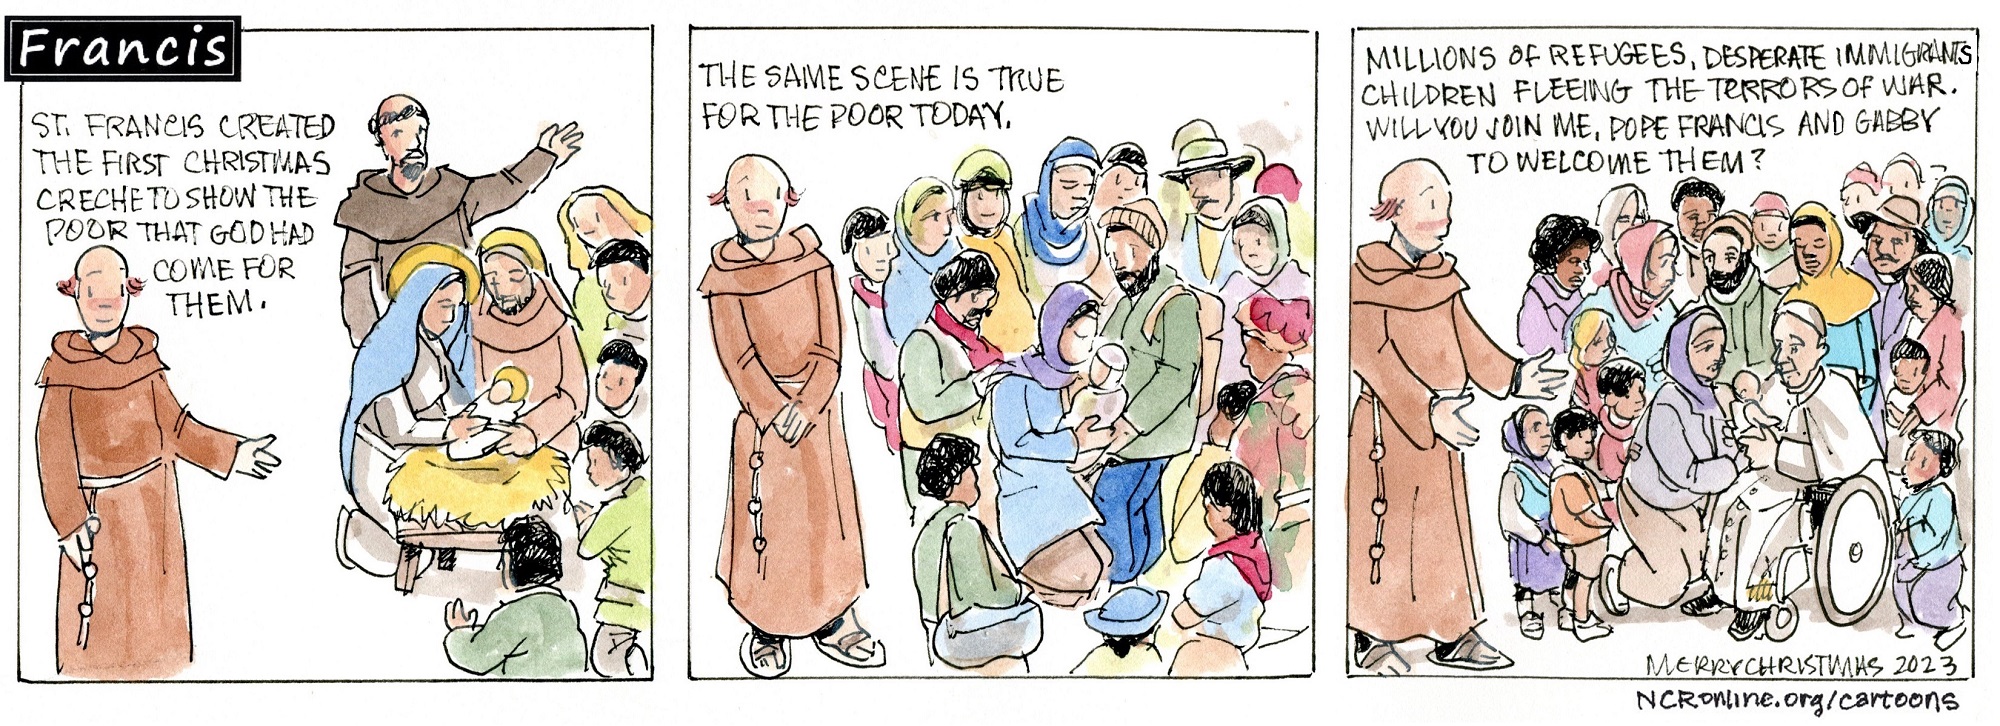 Francis, the comic strip: Brother Leo reminds us to welcome the stranger.